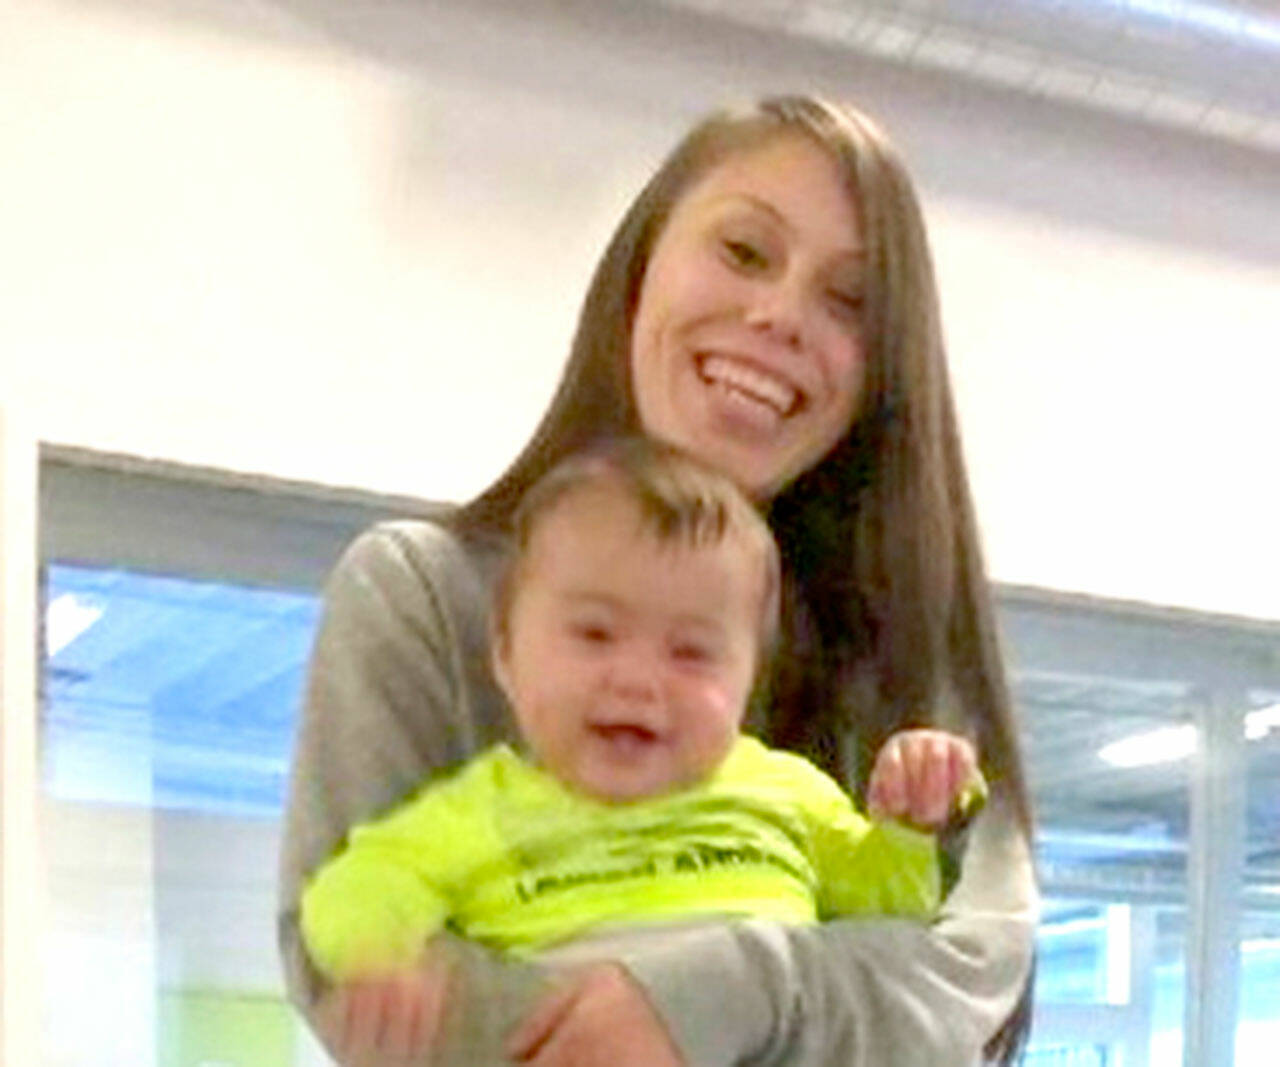 The late Kimberly Bender and her son, Matthew, shown here in a 2018 family photo.